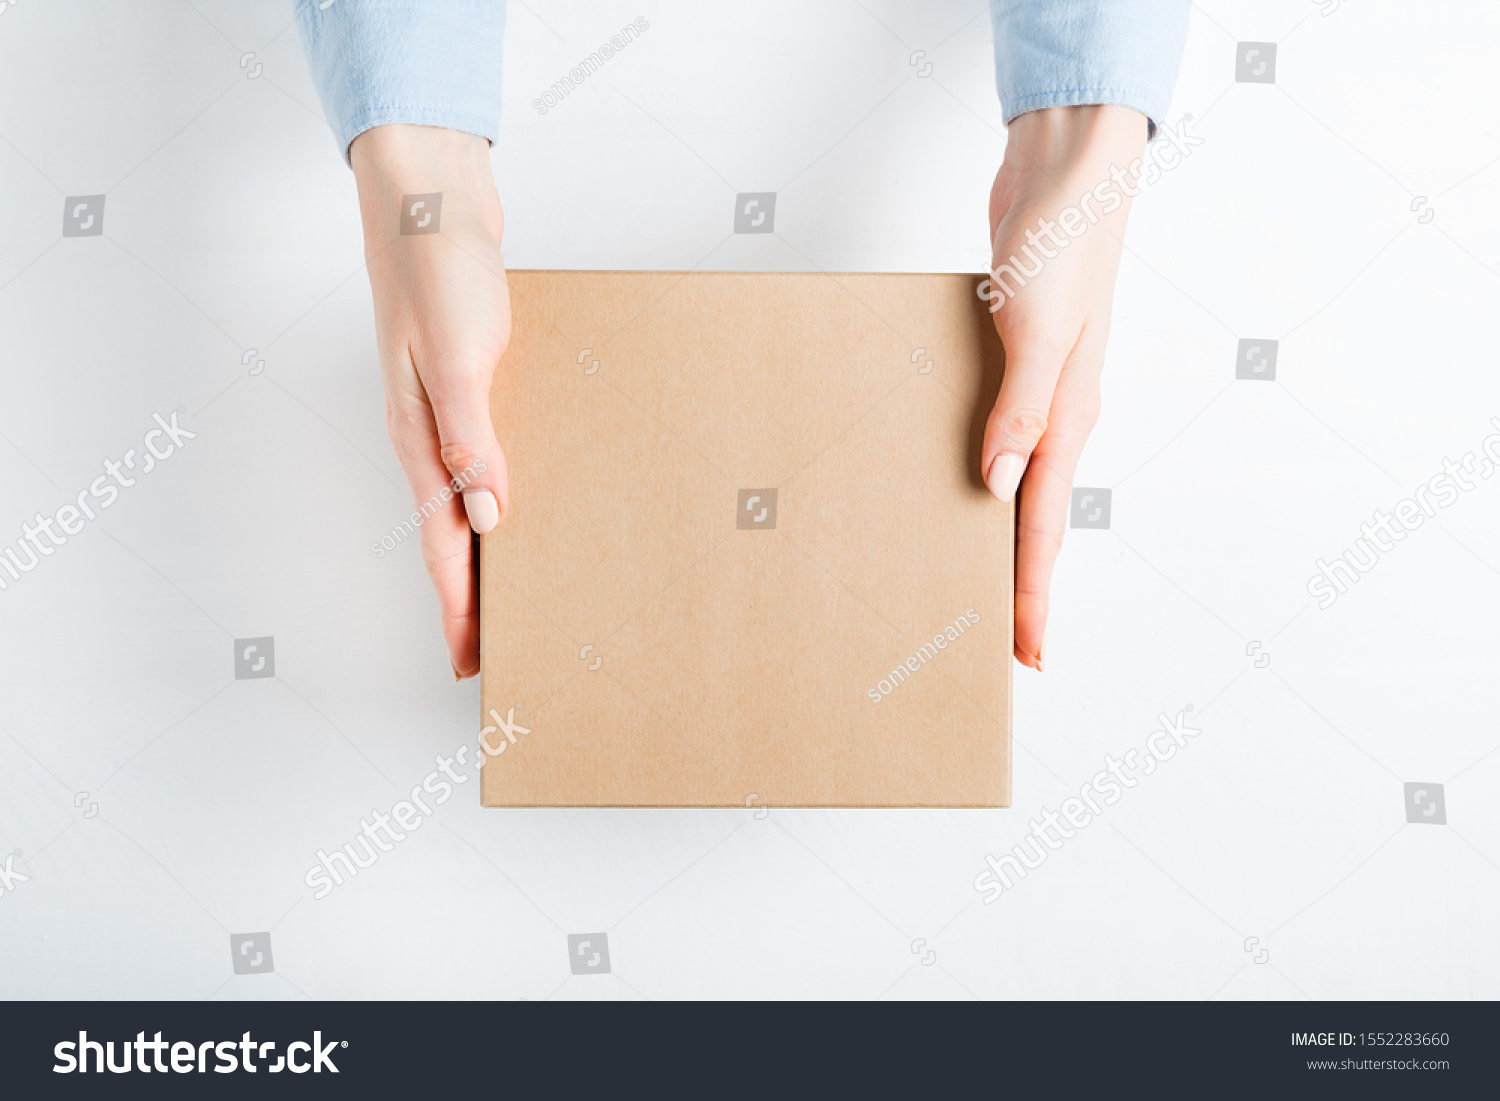 Square cardboard box in female hands. Top view, white background #1552283660